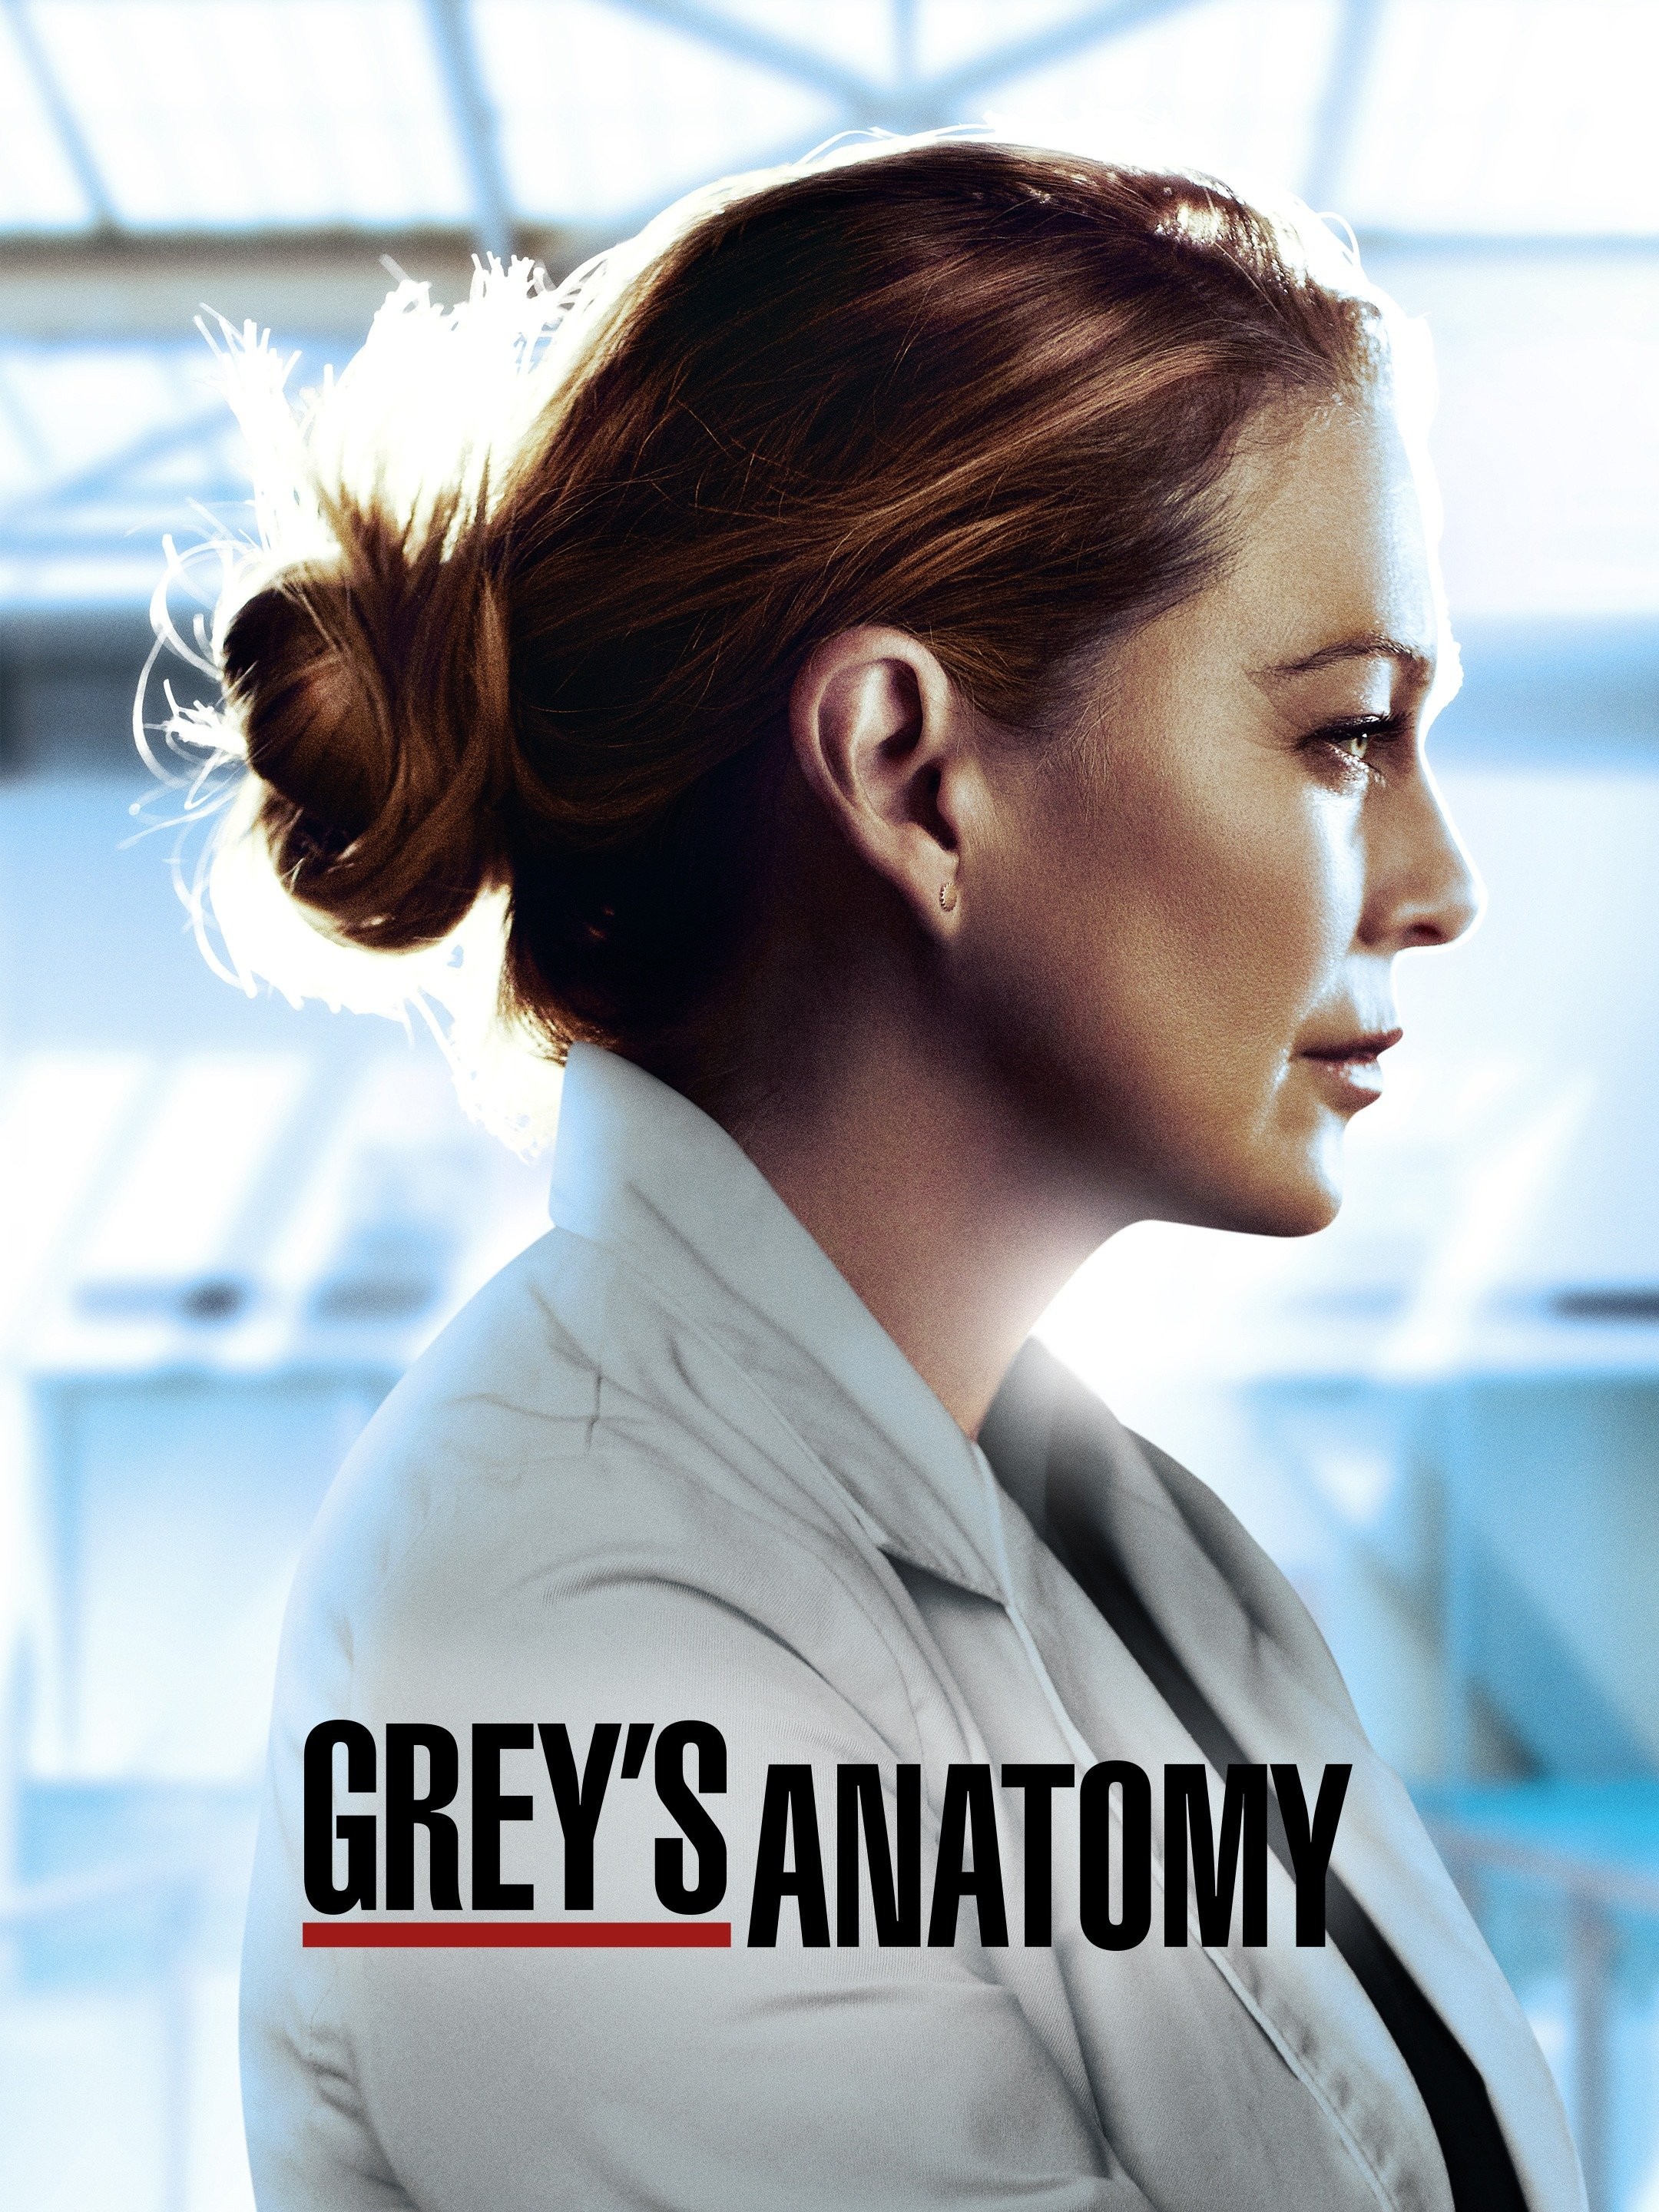 The Best Grey's Anatomy Doctors, Ranked - TV Guide